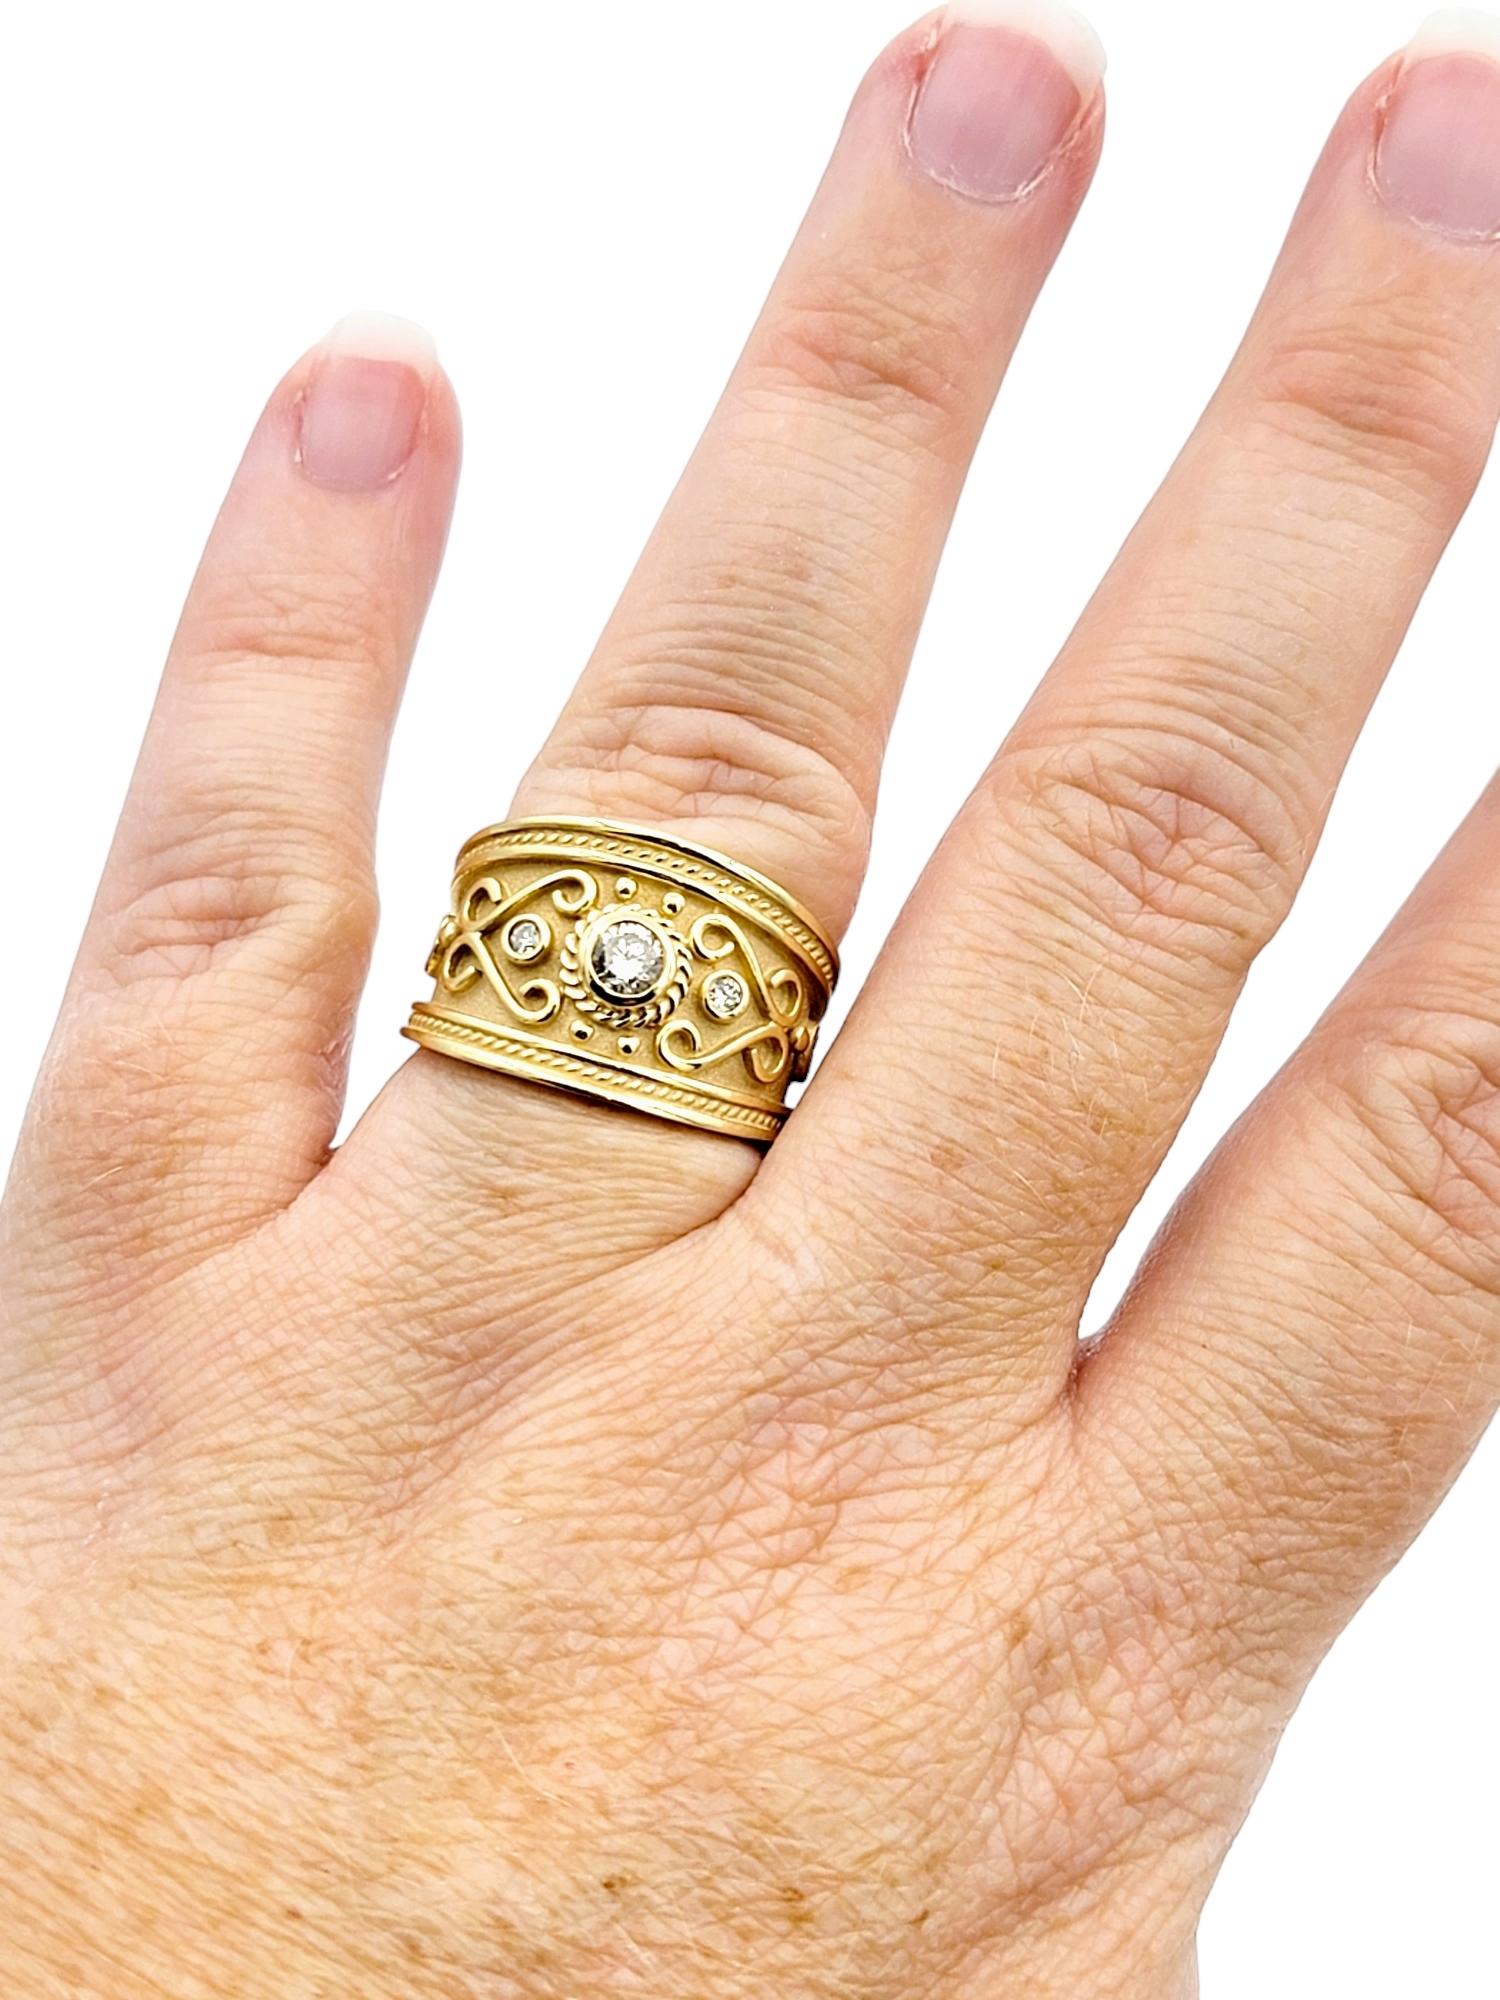 Le Vian Swirl Motif Tapered Shank Band Ring with Diamonds, 14 Karat Yellow Gold In Good Condition For Sale In Scottsdale, AZ